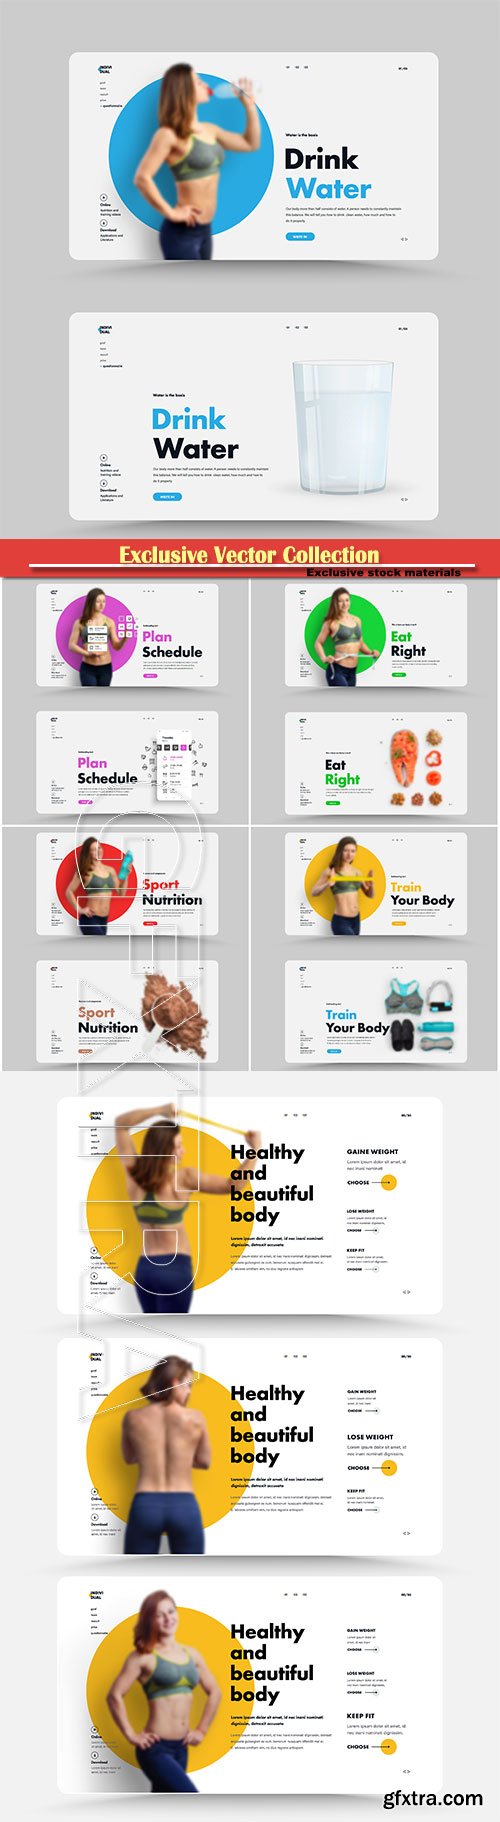 Design is the main page of the website for a sports trainer, nutritionist or gym